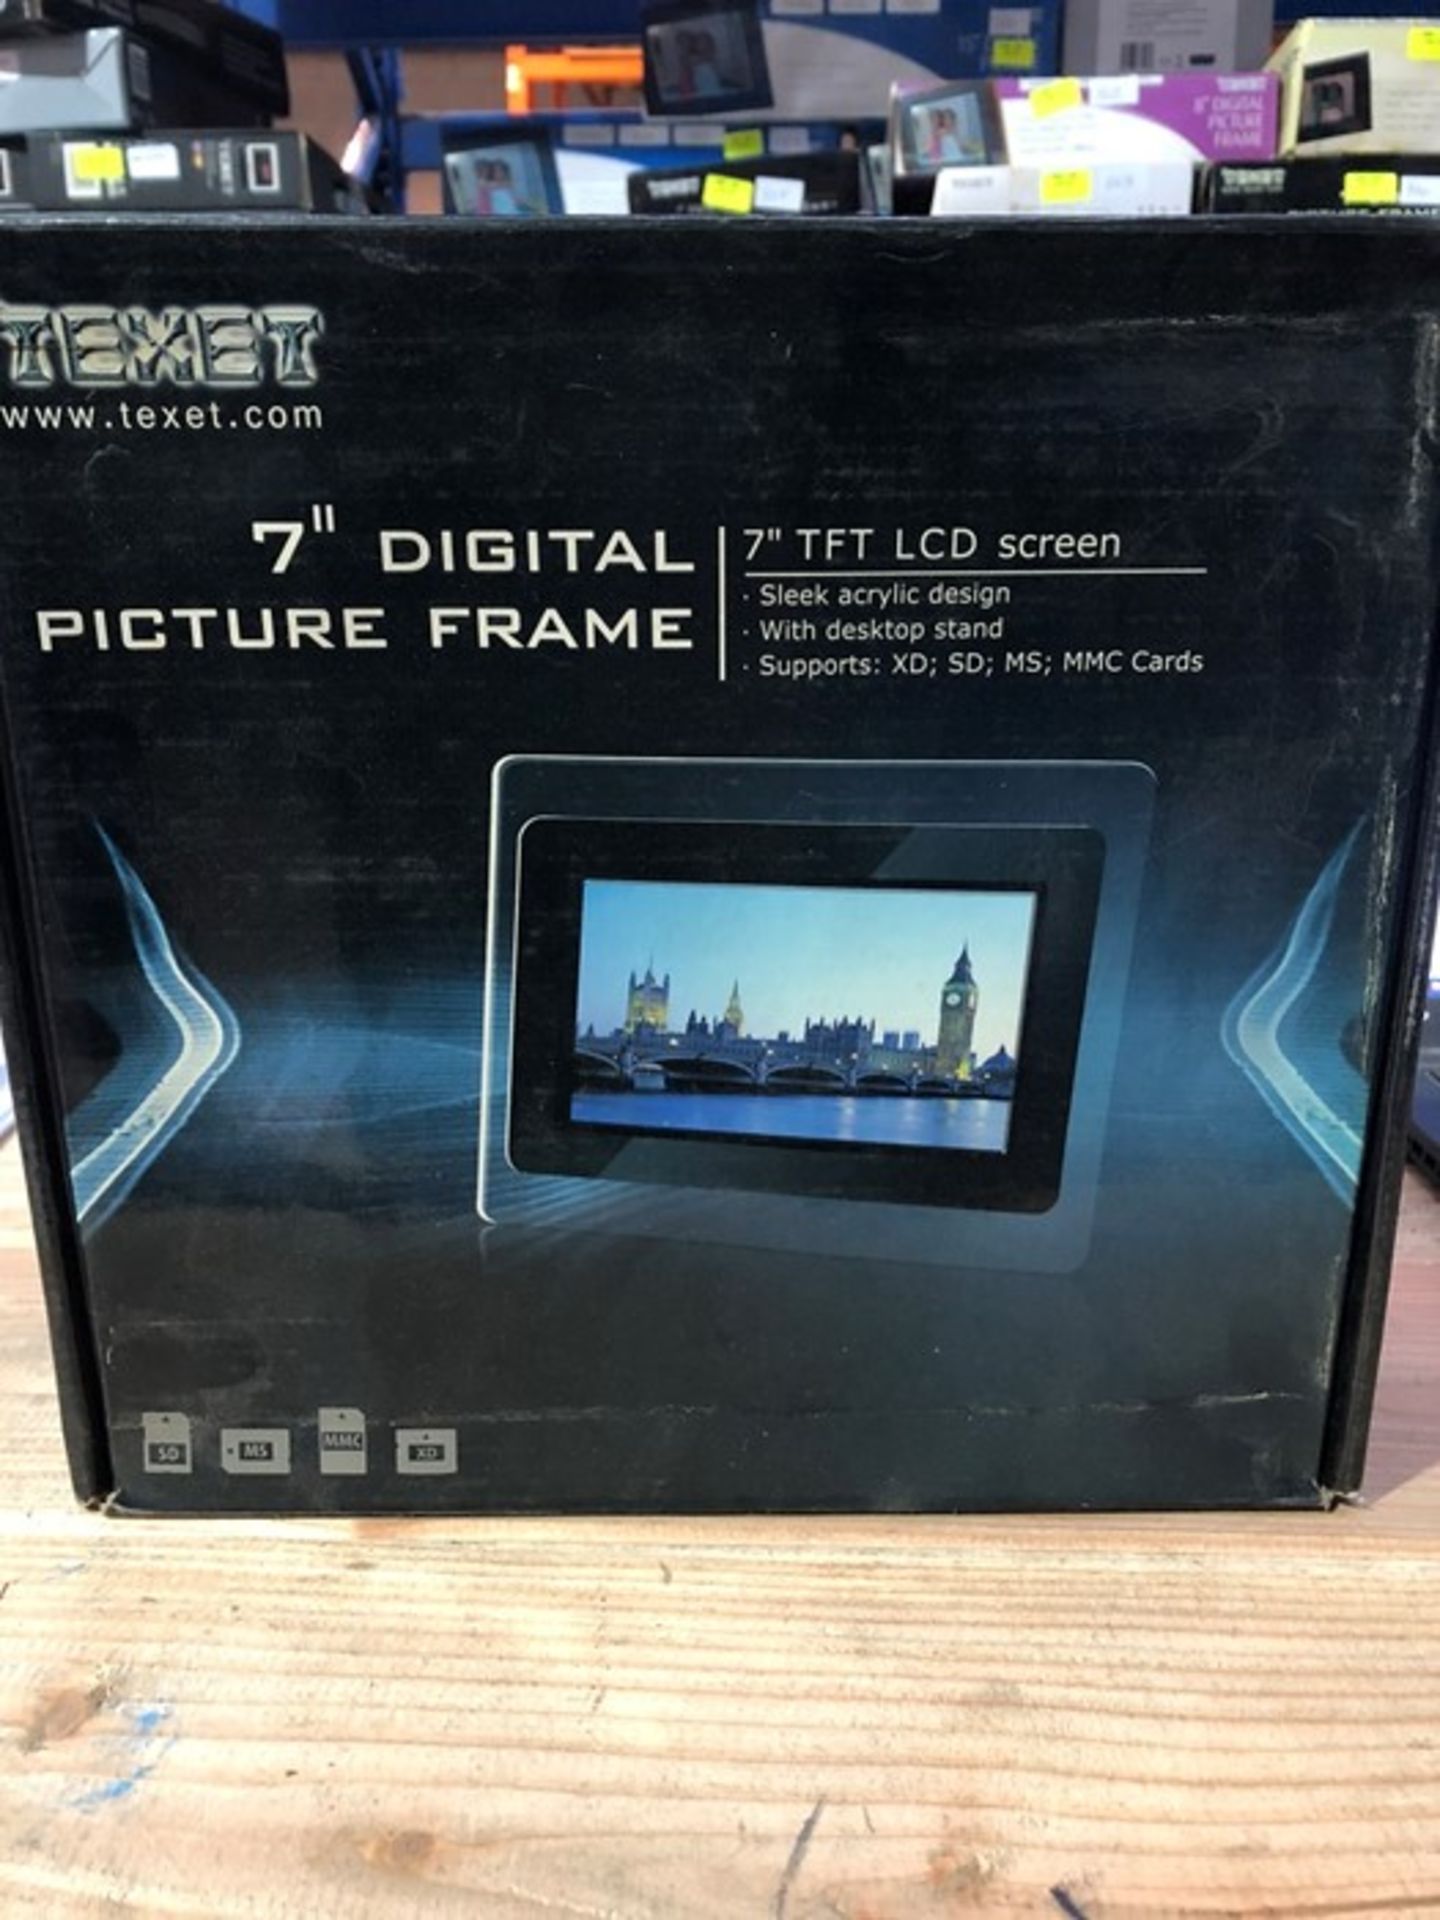 1 BOXED TEXET 7" DIGITAL PICTURE FRAME IN BLACK / RRP £29.99 (PUBLIC VIEWING AVAILABLE)